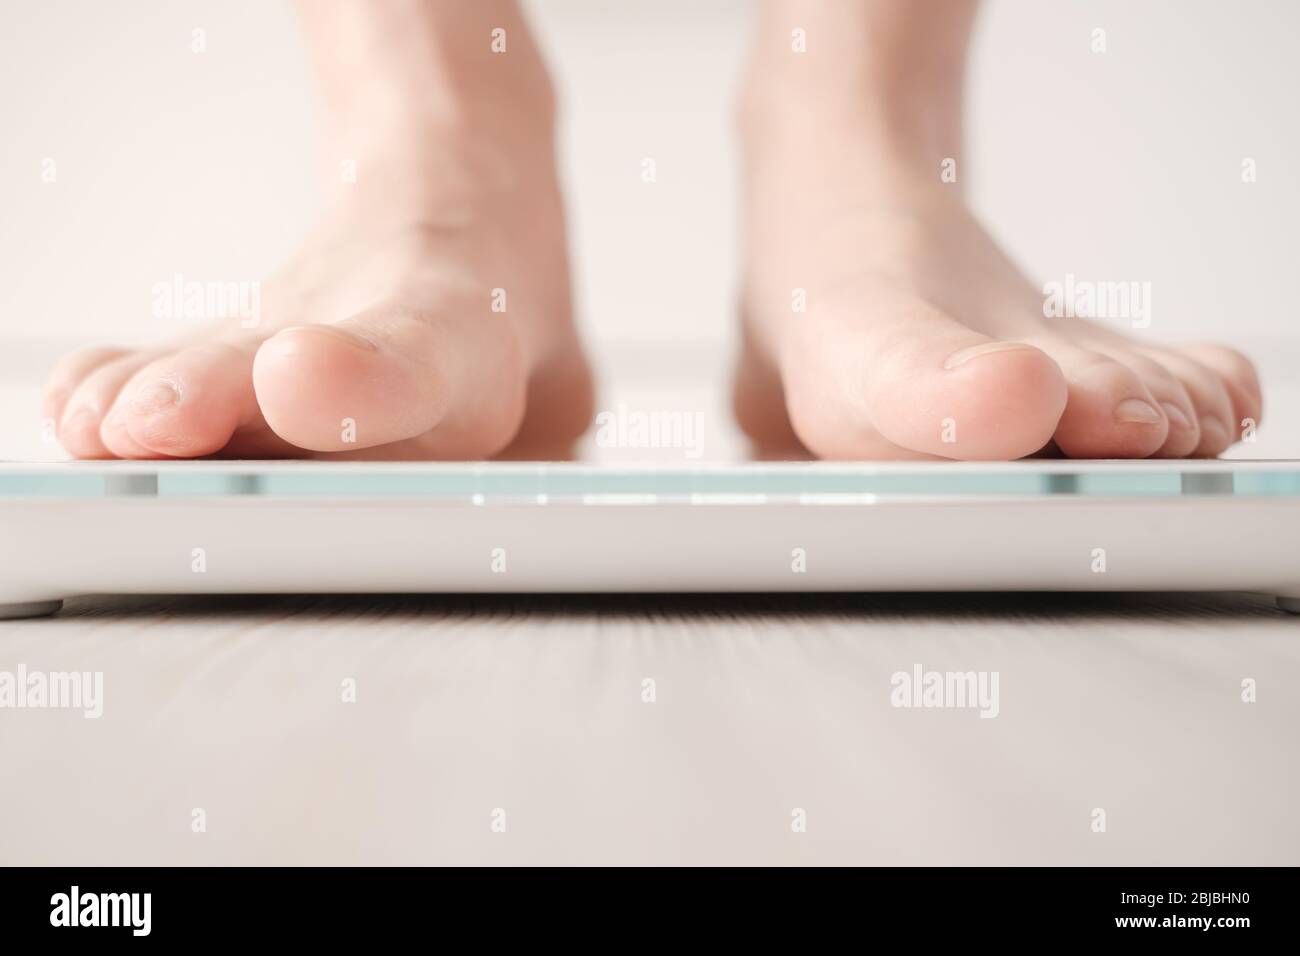 Bare feet stand on smart scales that makes bioelectric impedance analysis,  BIA, body fat measurement. Stock Photo by ©akoldunov 369502604